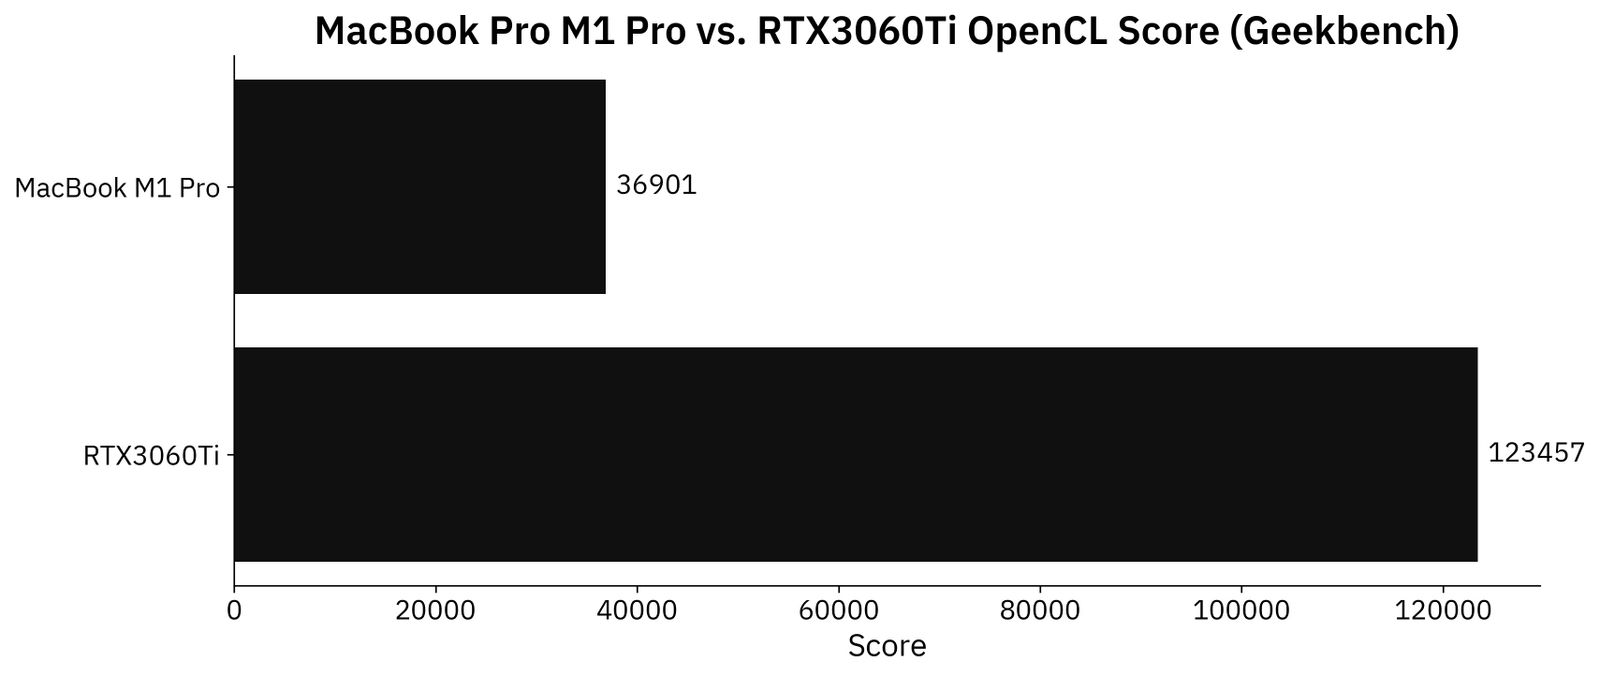 Image 4 - Geekbench OpenCL performance (image by author)